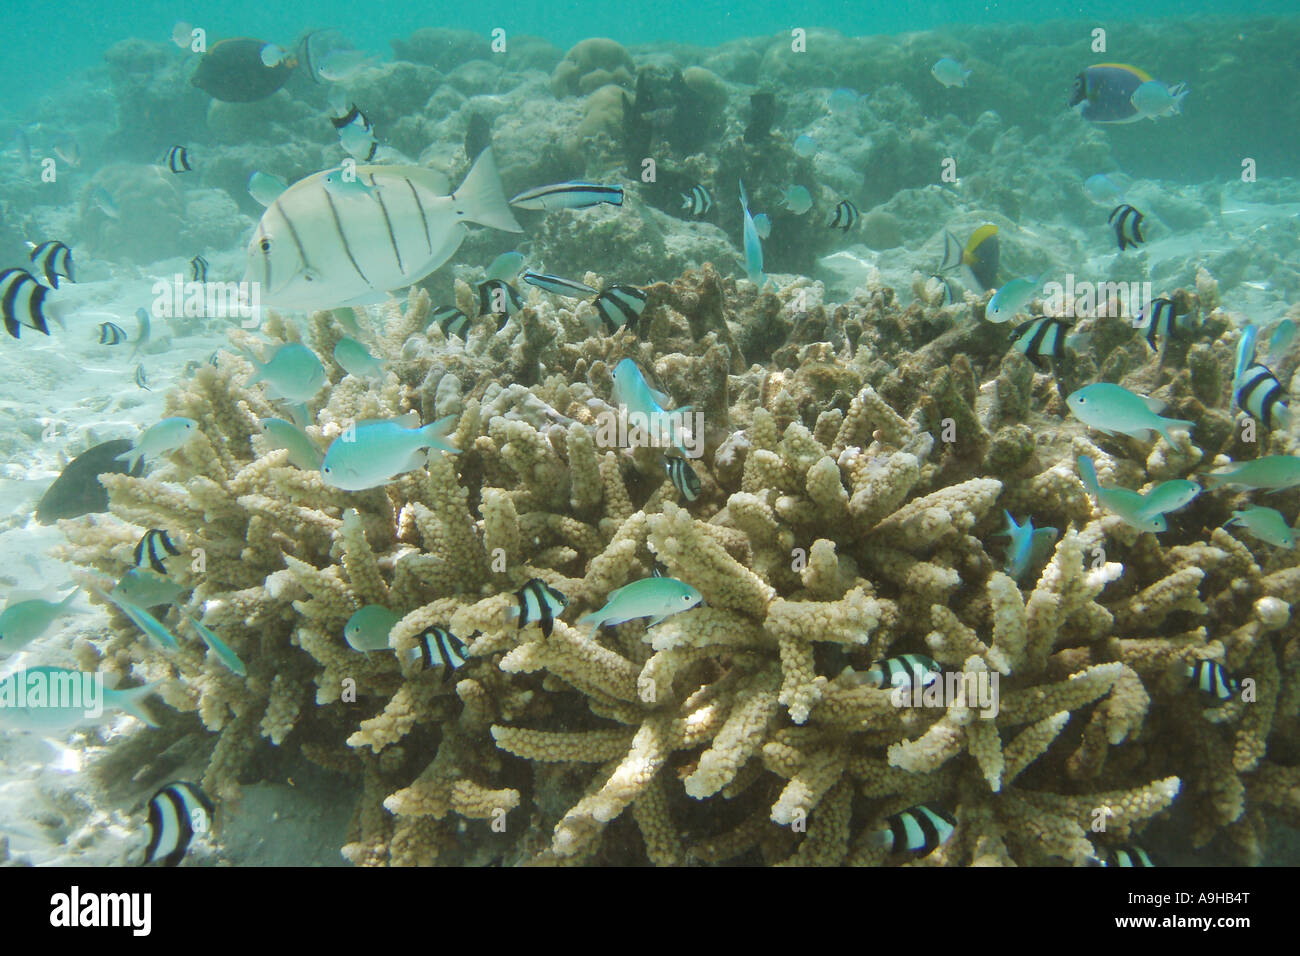 Fish swimming amongst hard coral in shallow water Stock Photo